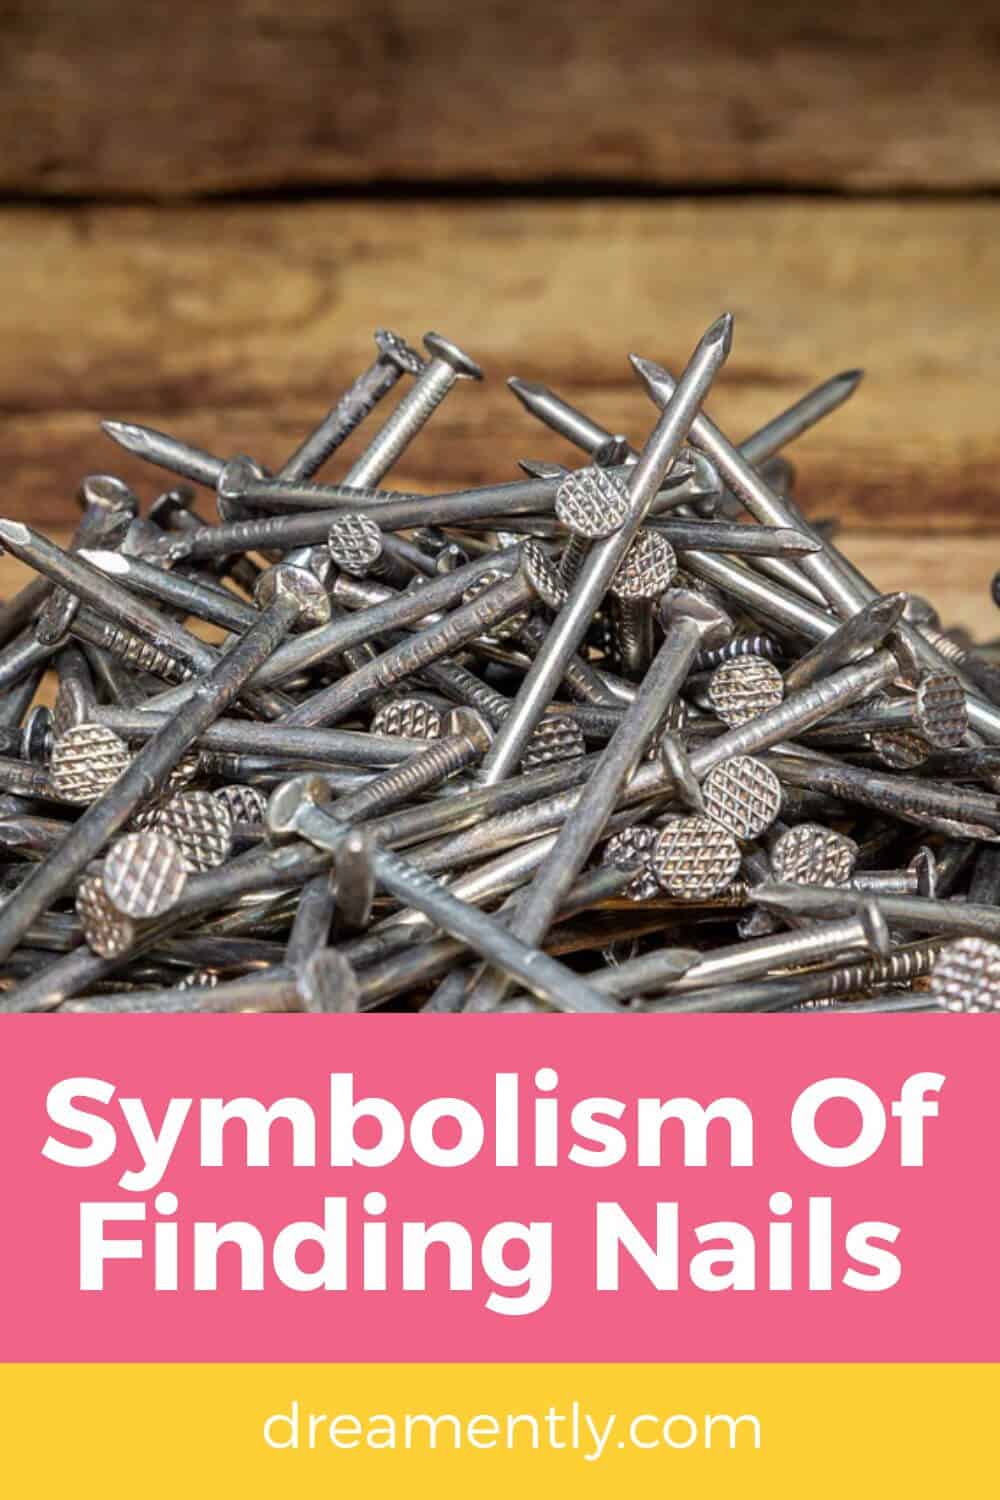 Symbolism Of Finding Nails (2)